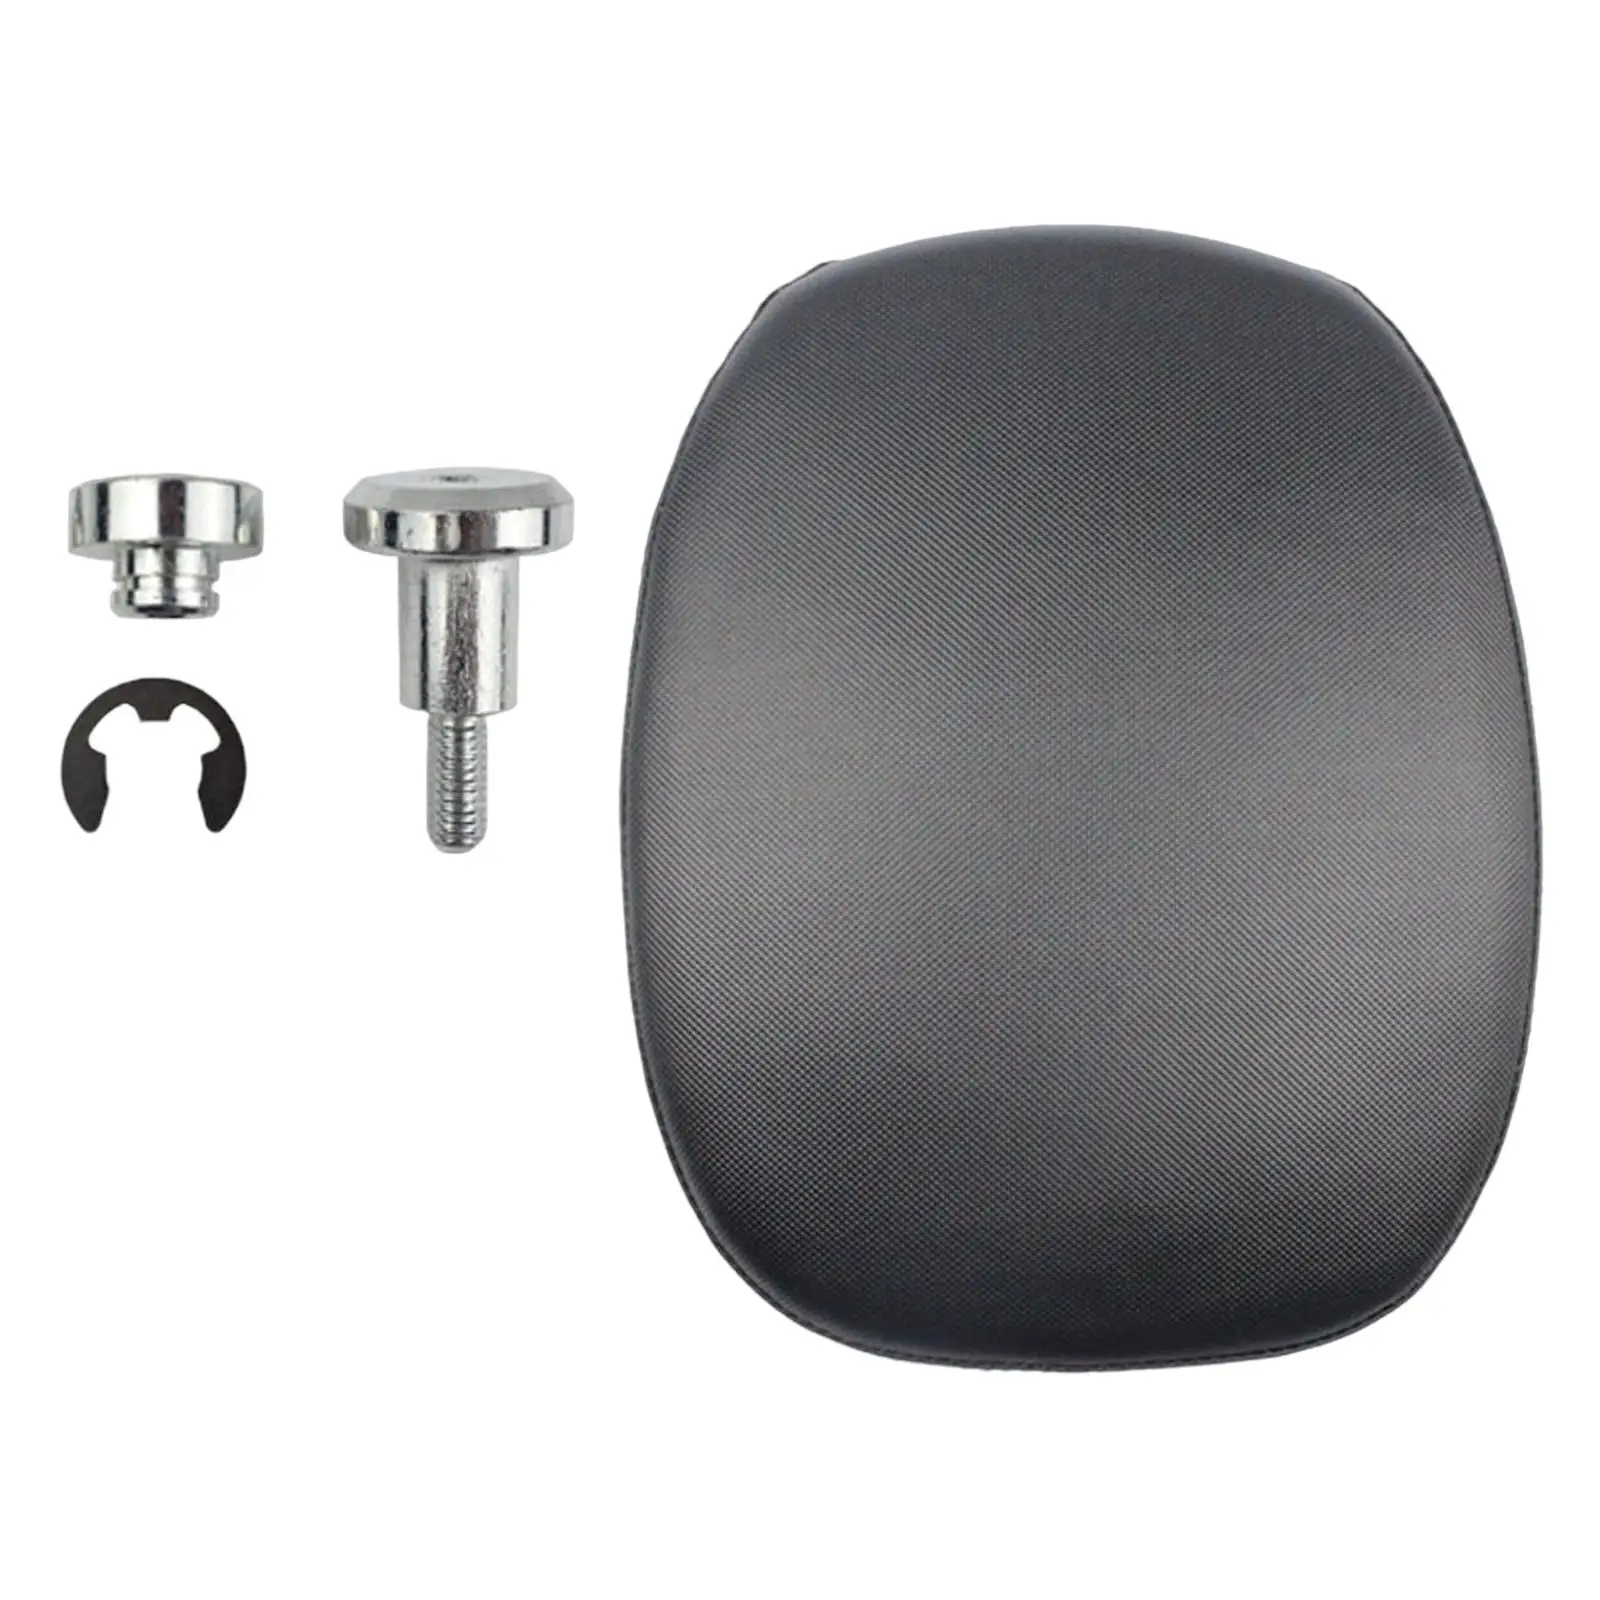 Motorcycle Rear Passenger Seat Pillion Pad for 883 1200 x48 Accessory